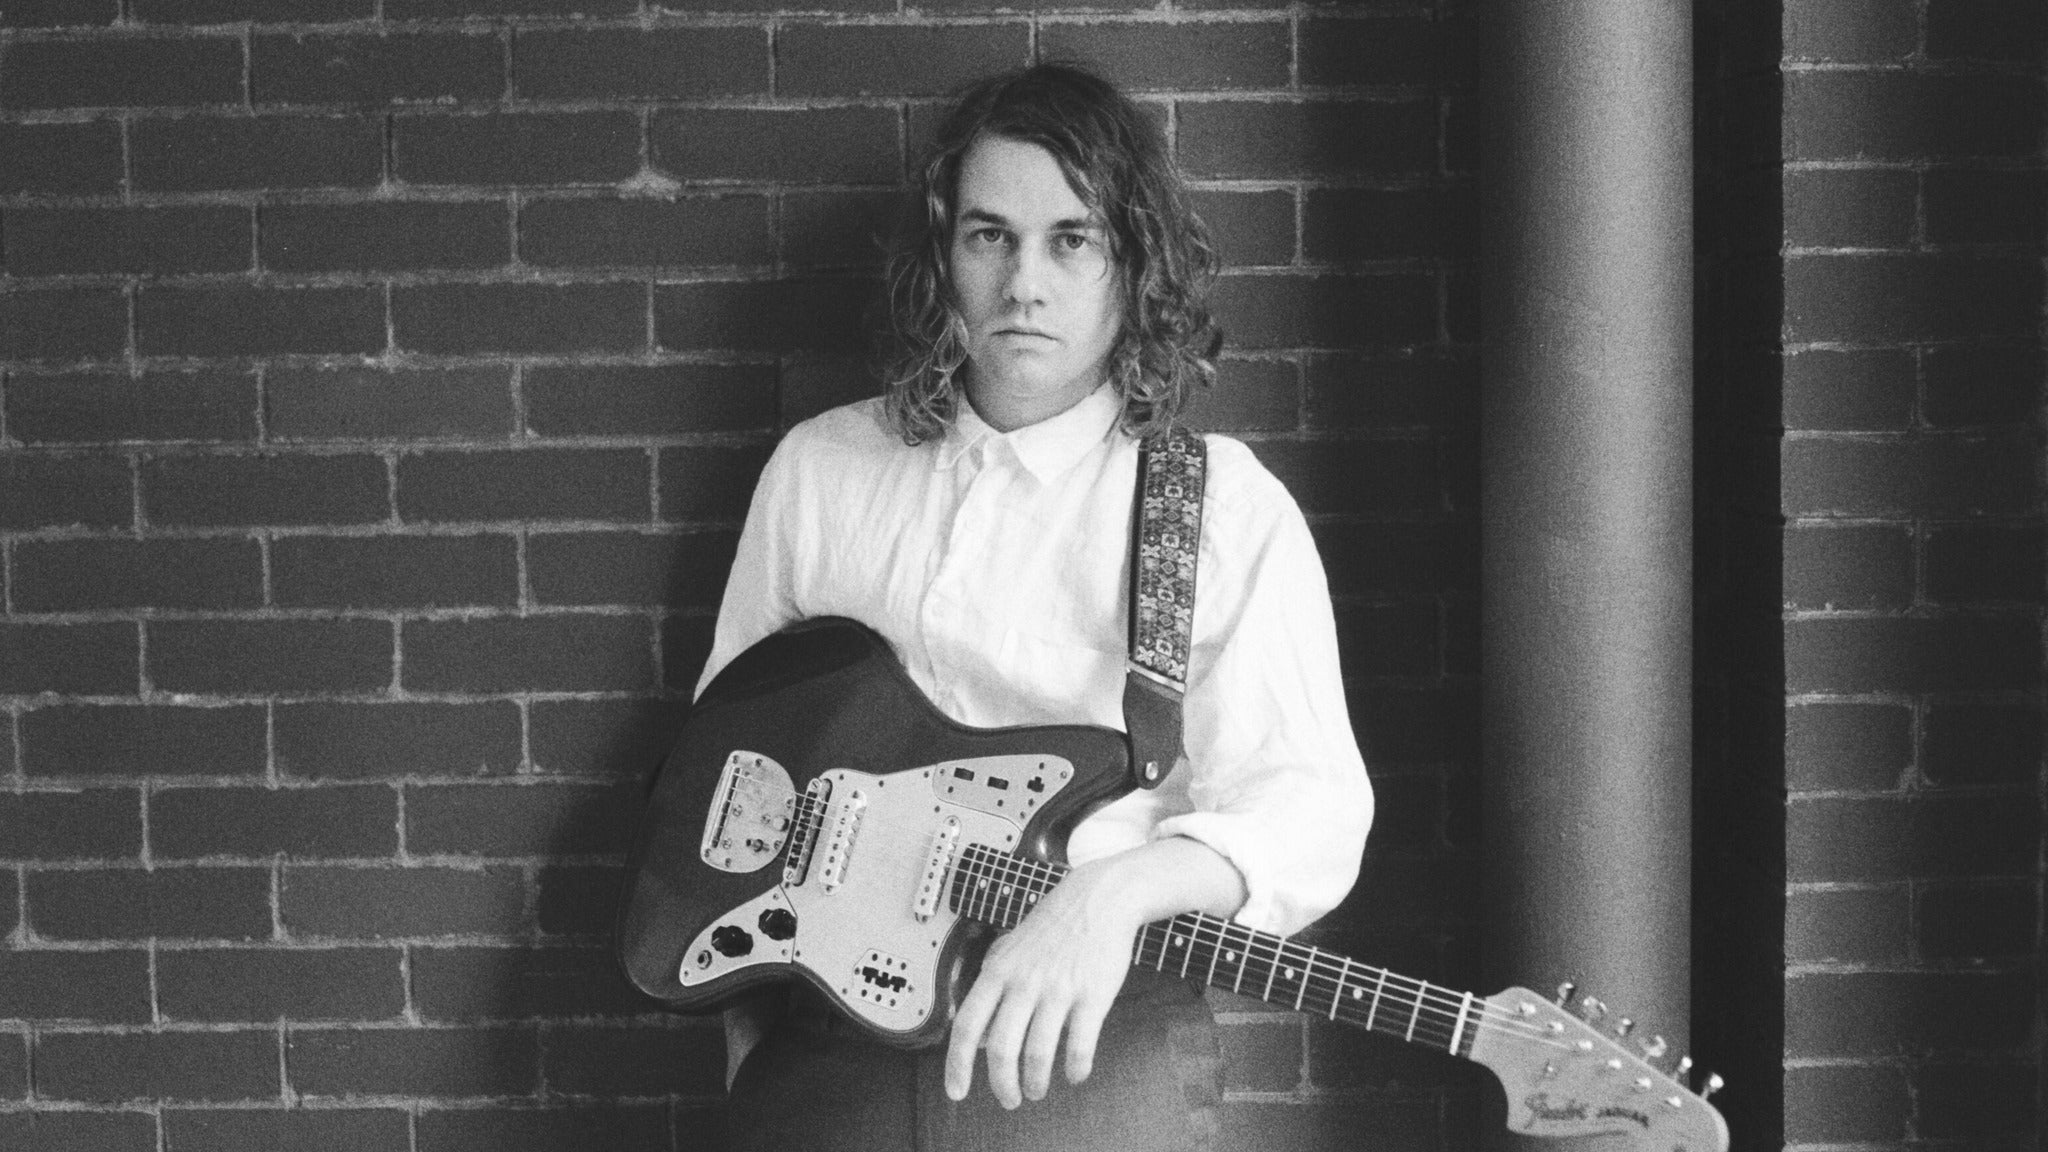 KXT 91.7 Presents Kevin Morby